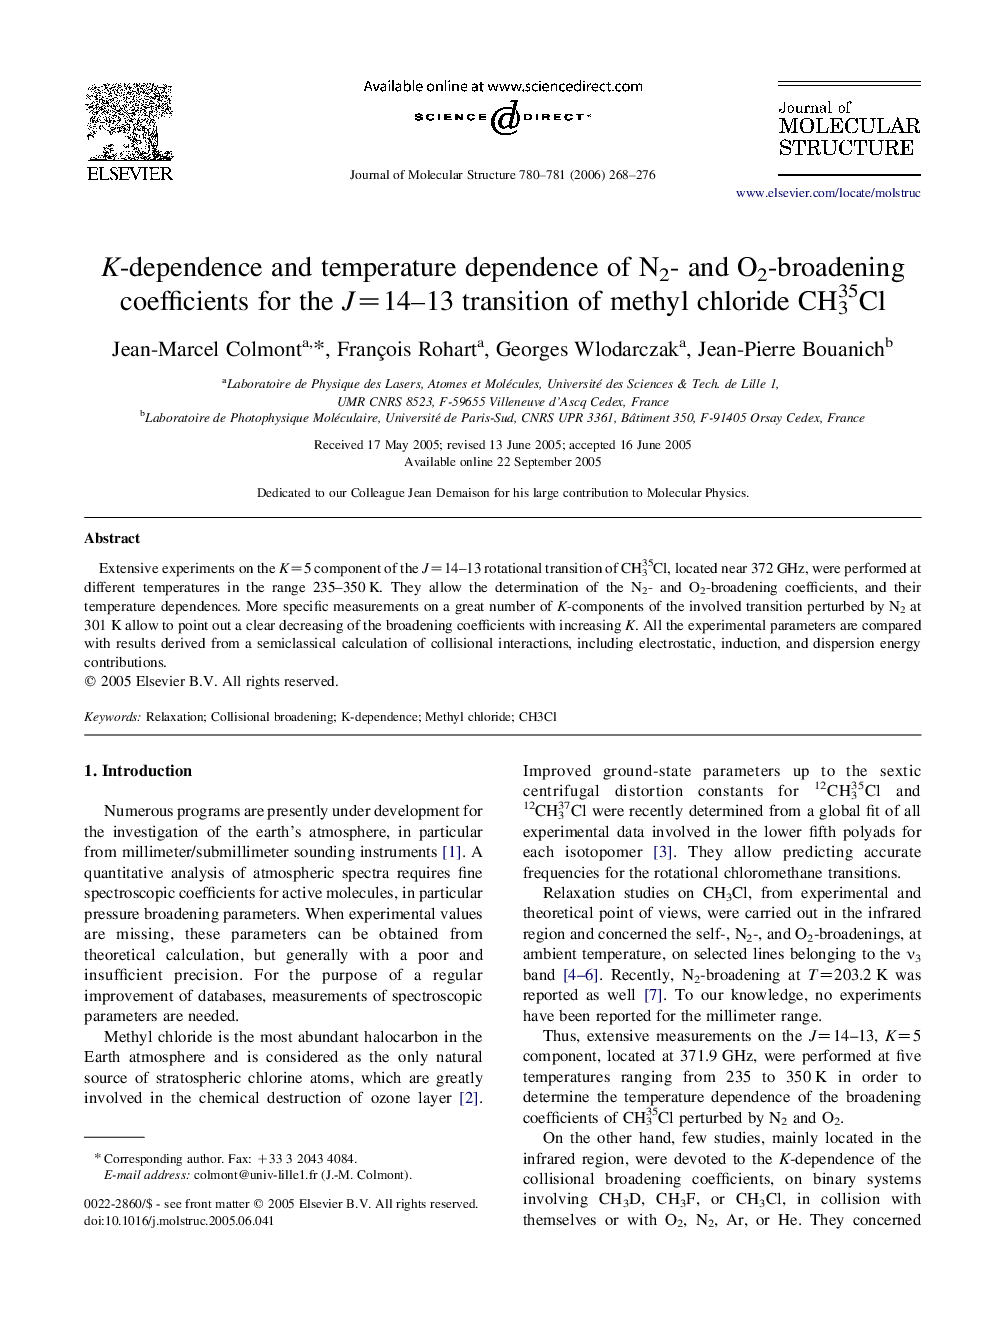 K-dependence and temperature dependence of N2- and O2-broadening coefficients for the J=14–13 transition of methyl chloride CH335Cl